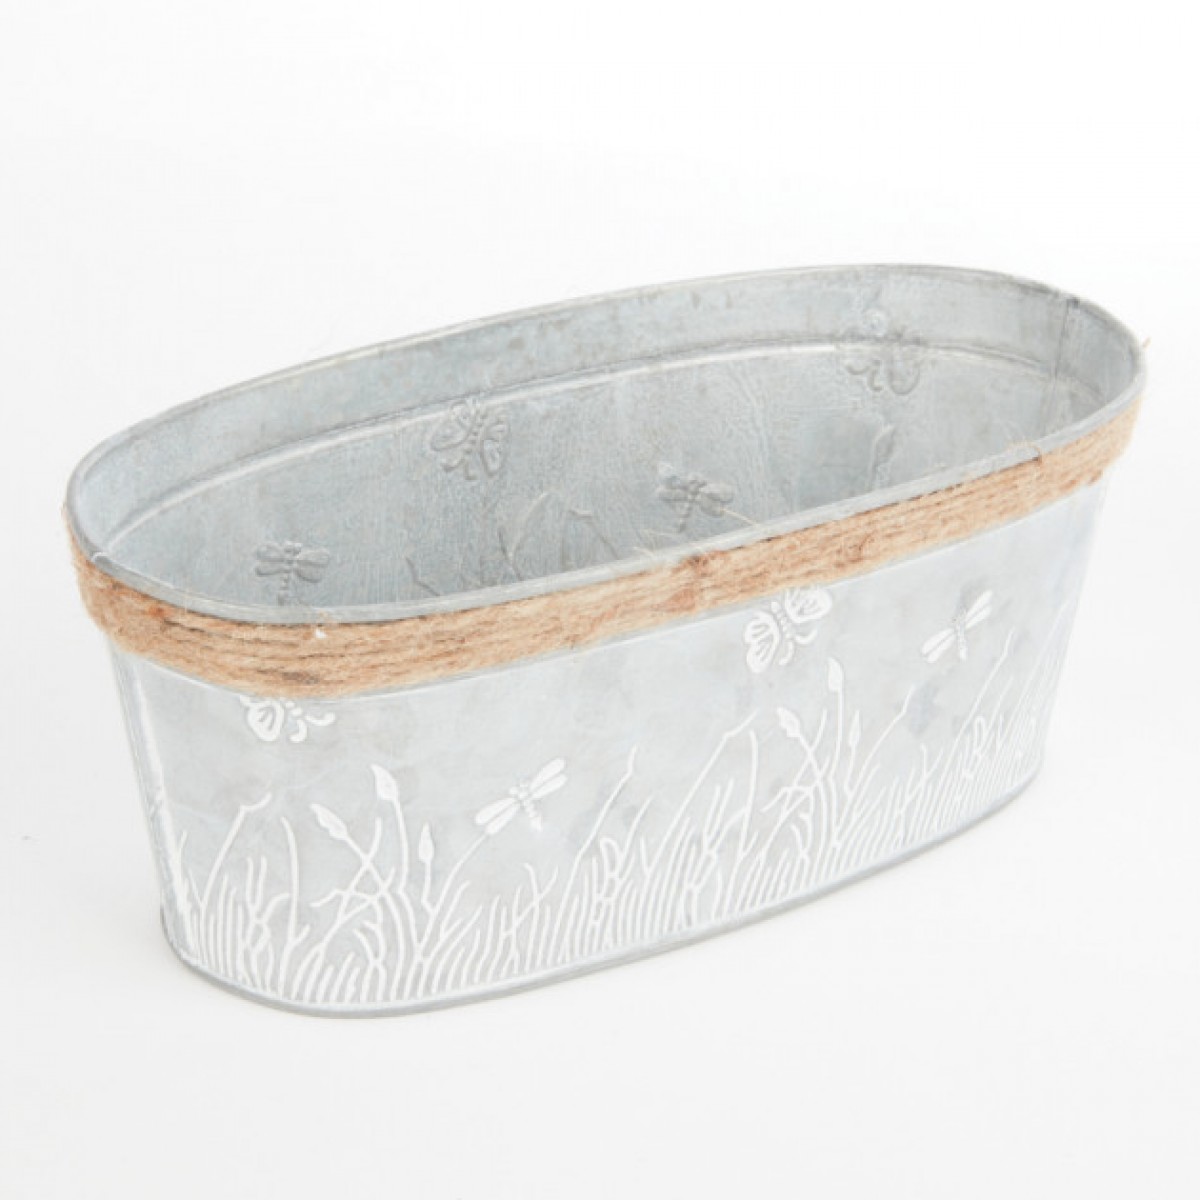 5204 Trough Lined 24x12x9.5cm Tin/Metal Container - 1 No